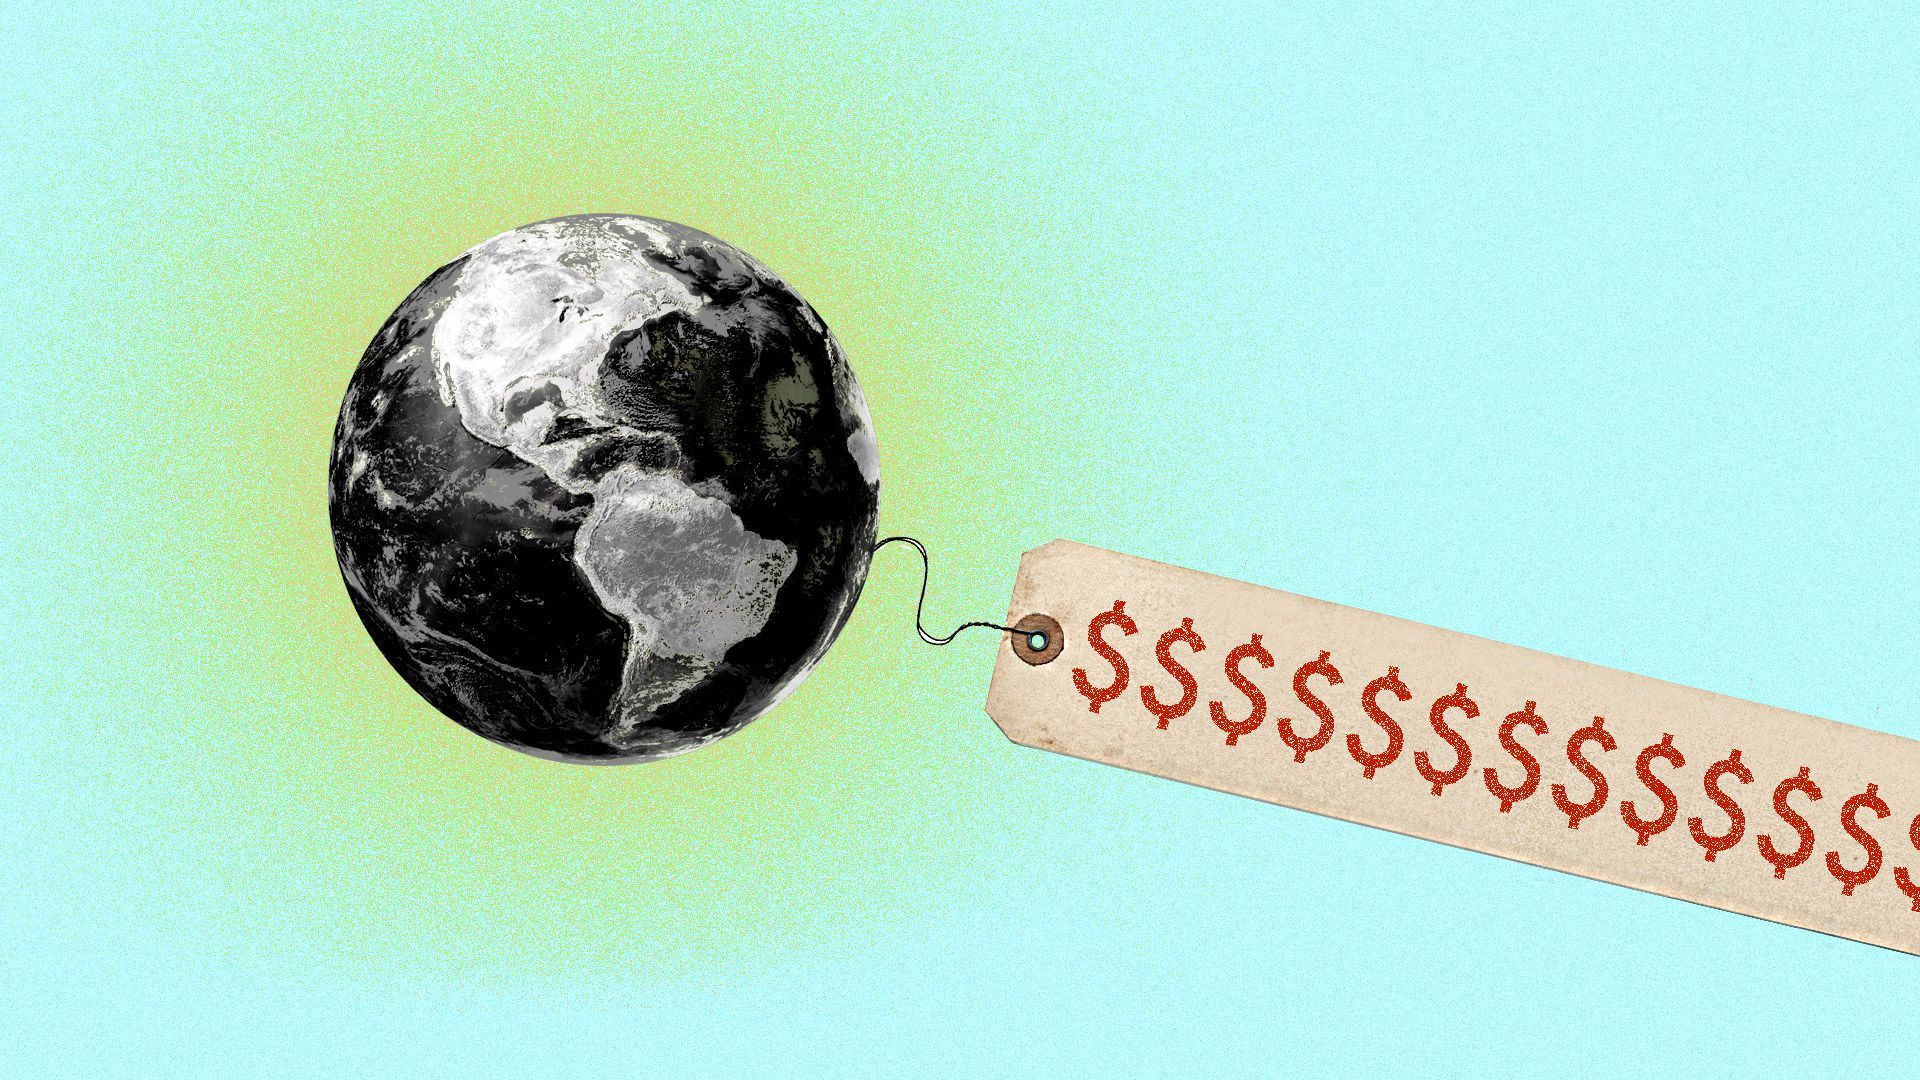 In this illustration, a large price tag dangles from a black and white still image of the earth.